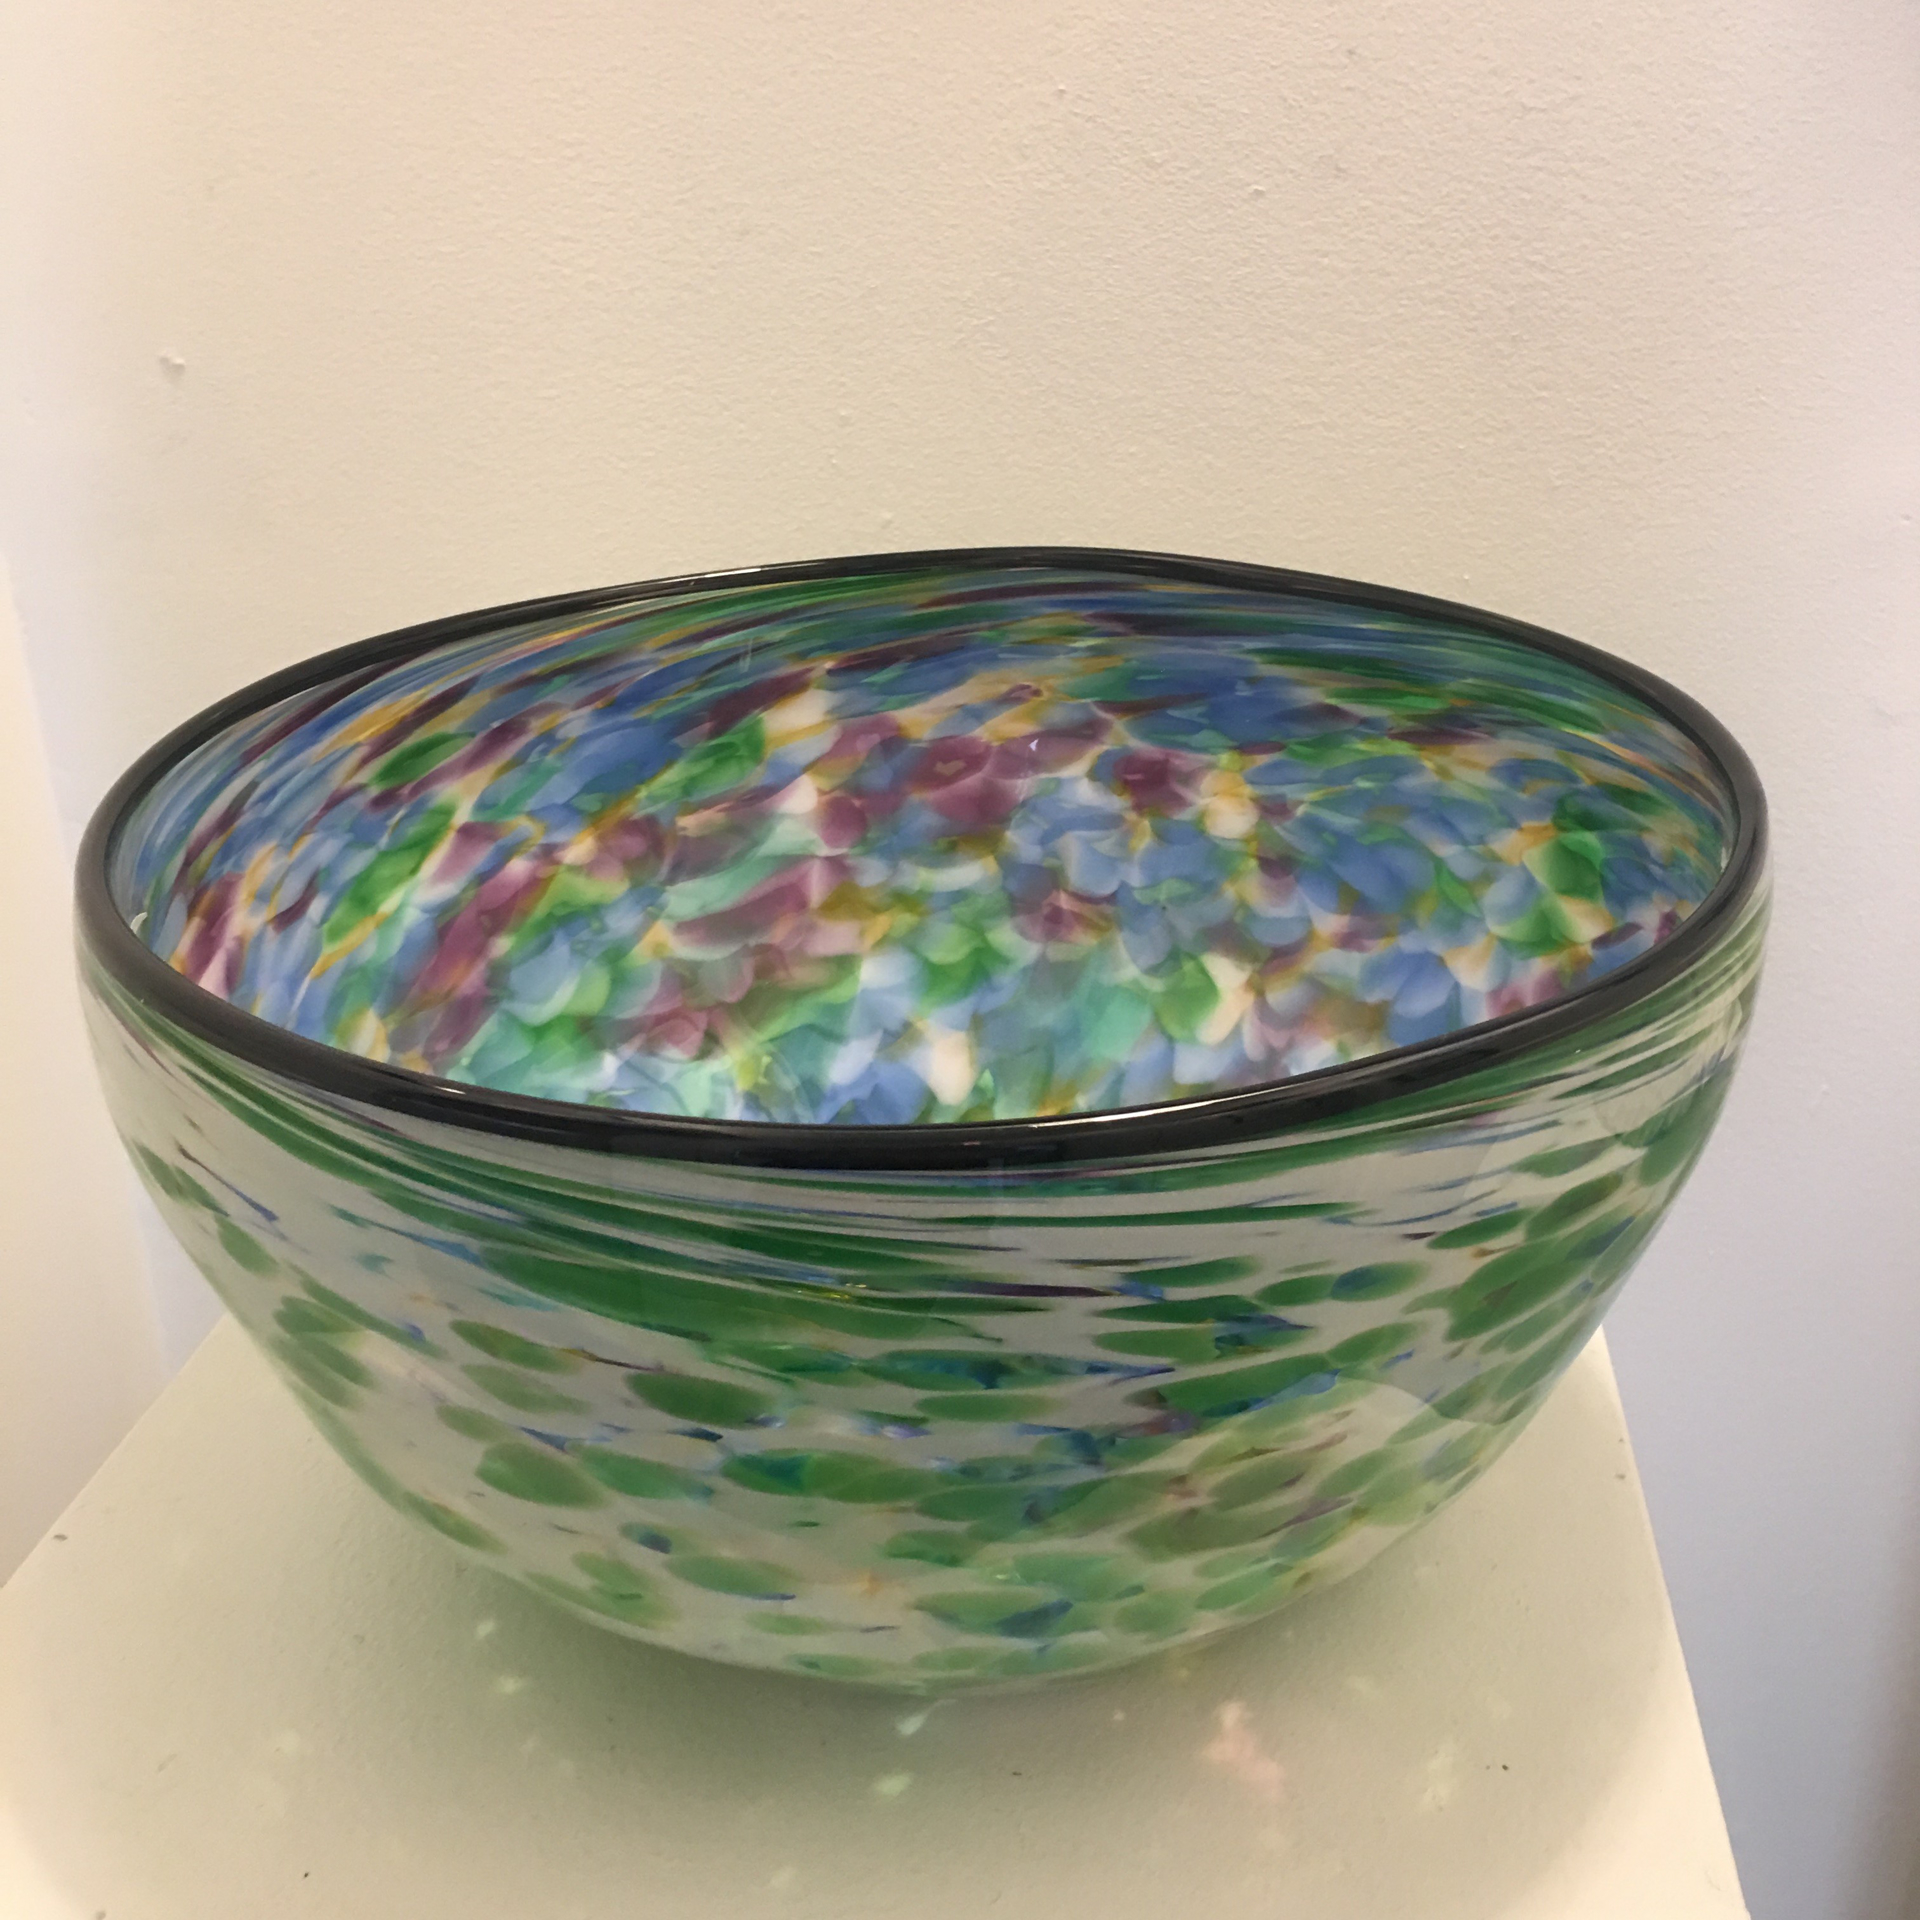 Green and White Swirl with Rainbow Interior XL Bowl by Devan Cole